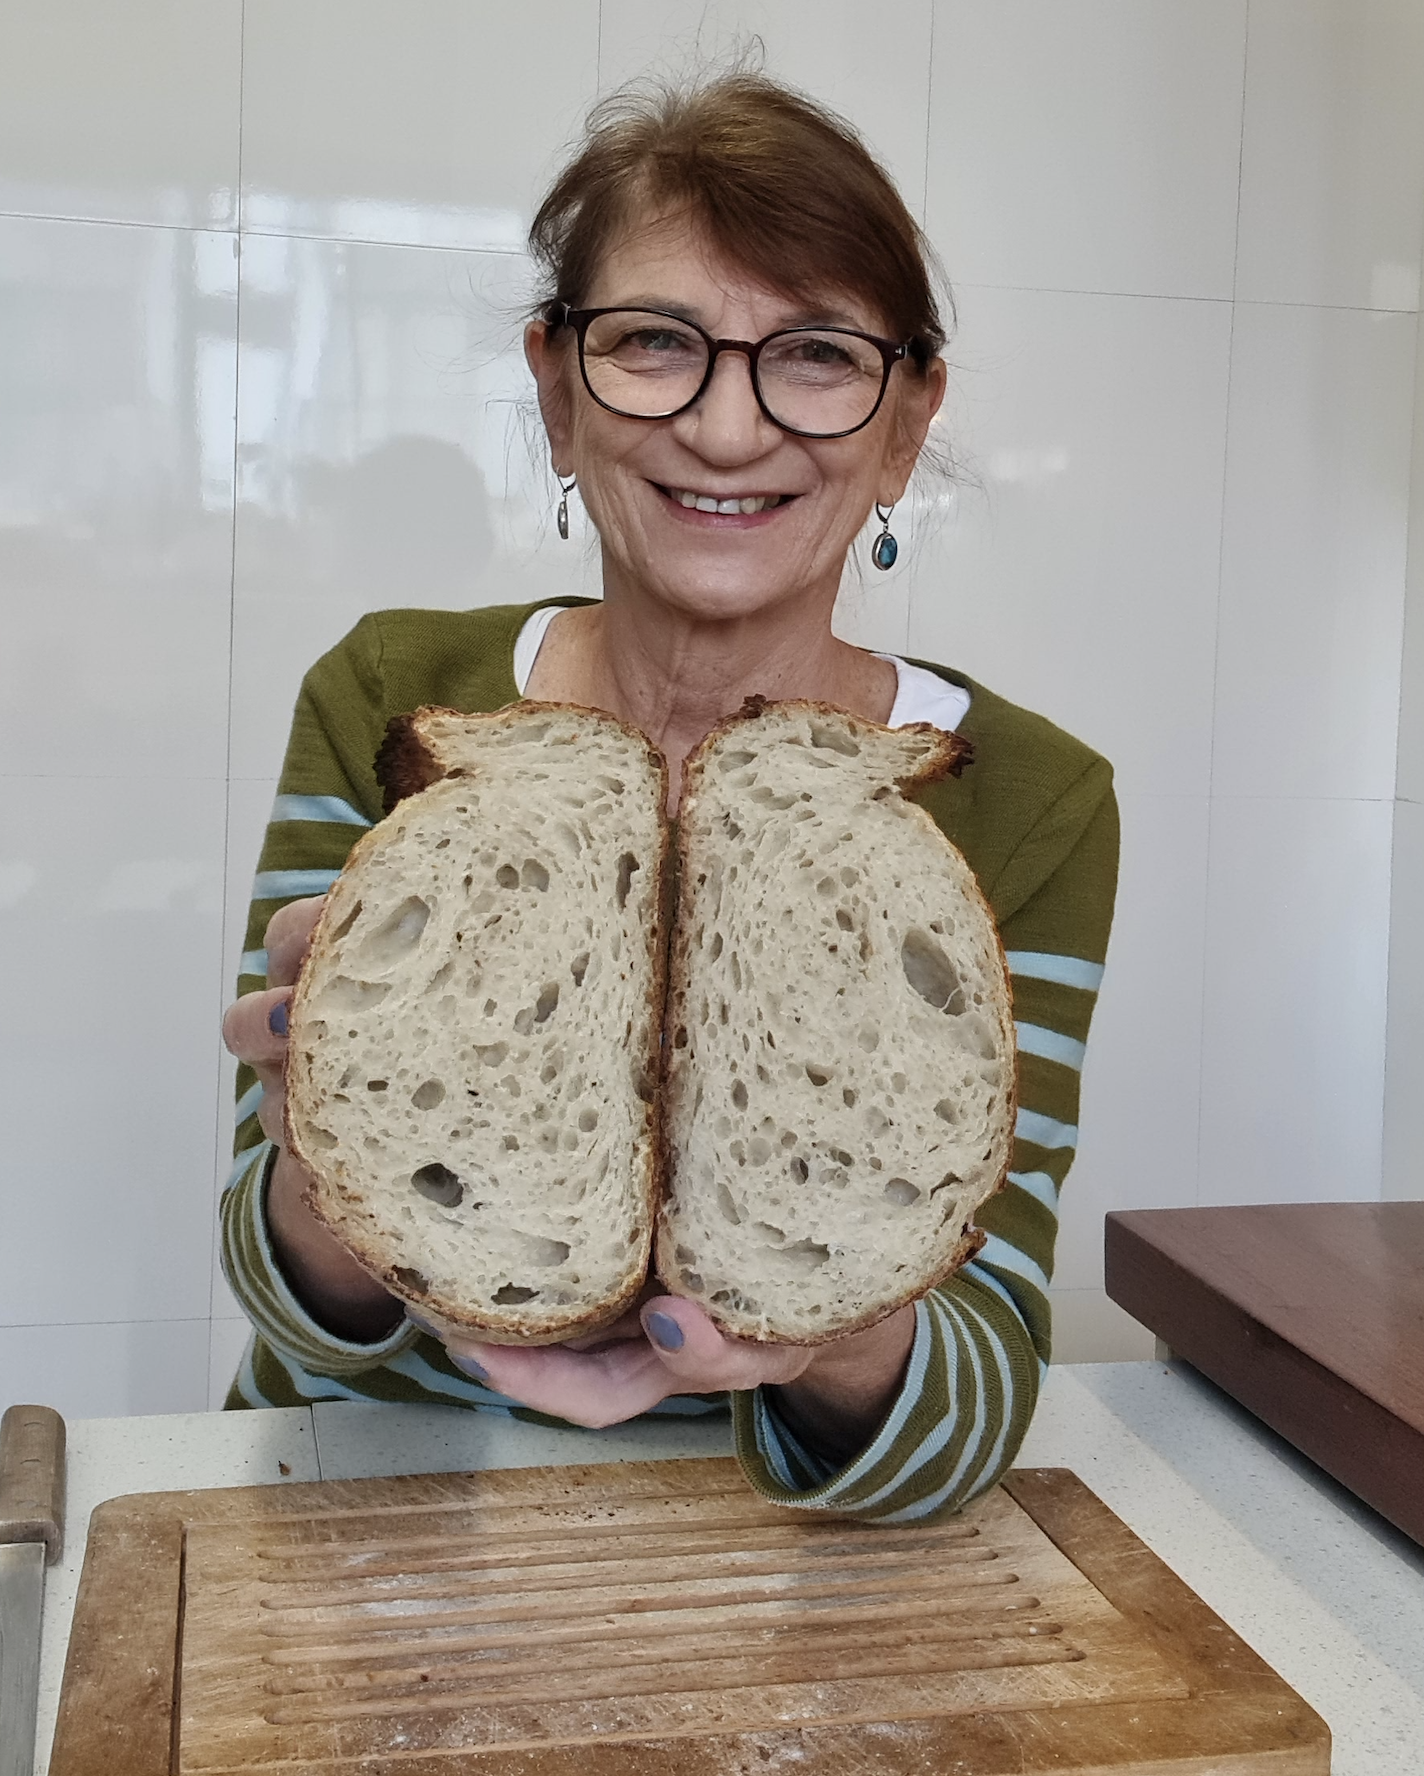 interview with Mariana Koppmann biochemist author sourdough bread scientist based in buenos aires argentina south america follow her on instagram 4